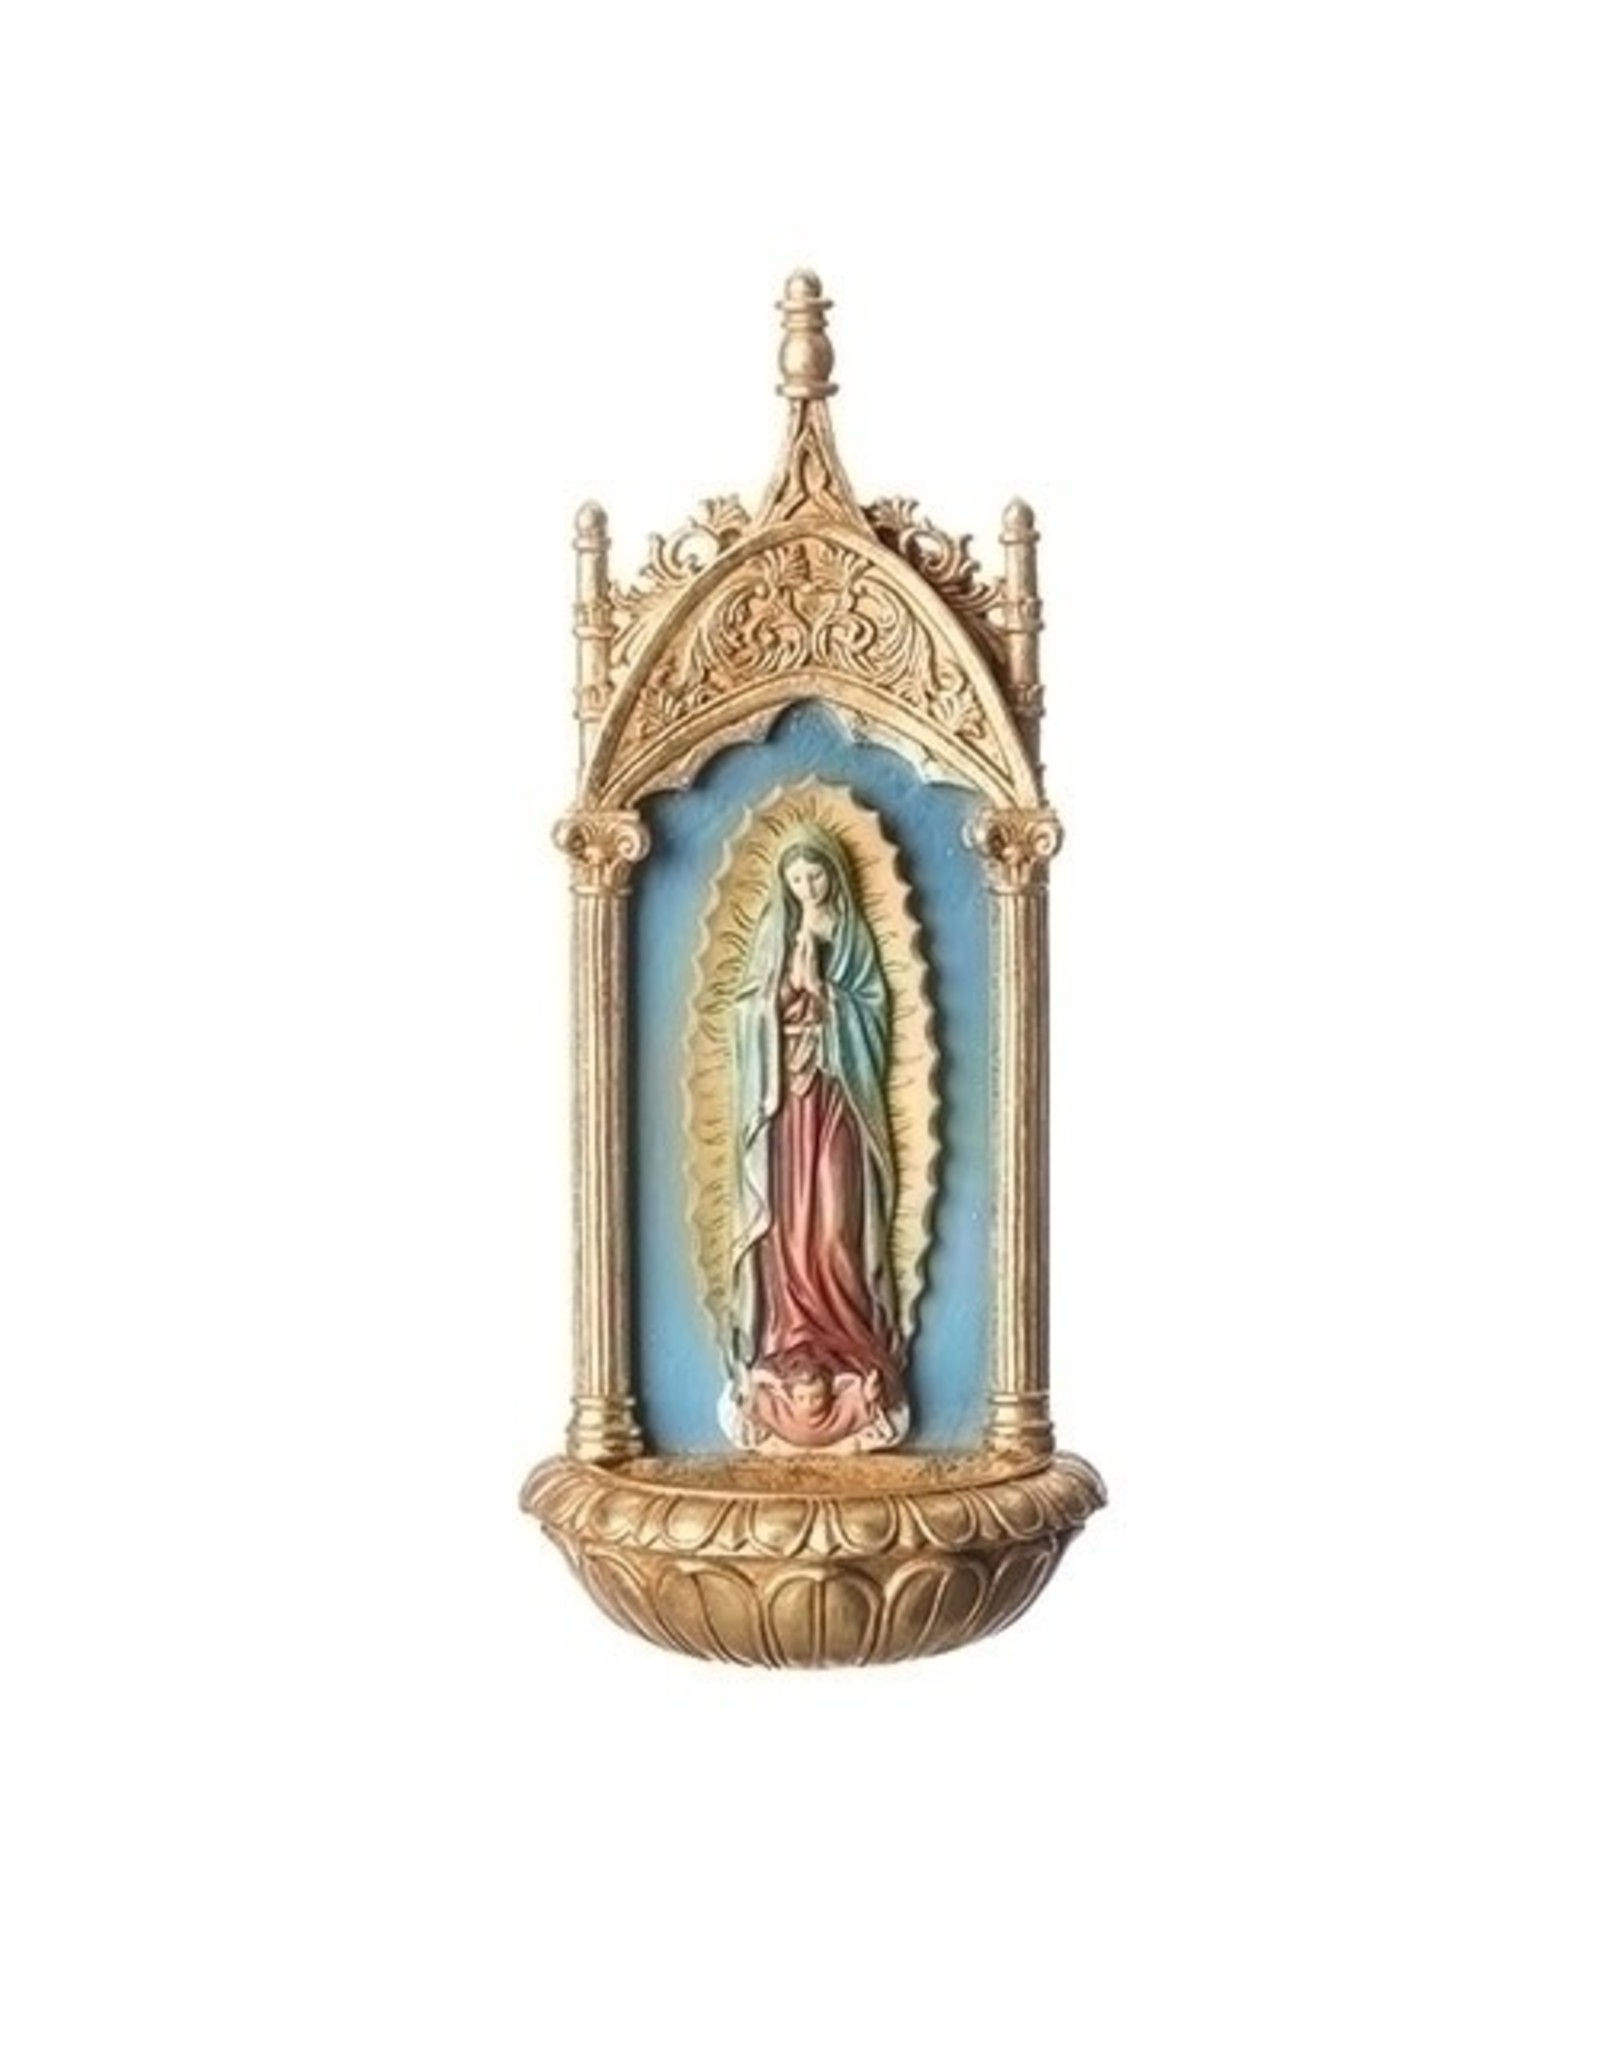 Roman Holy Water Font - Our Lady of Guadalupe